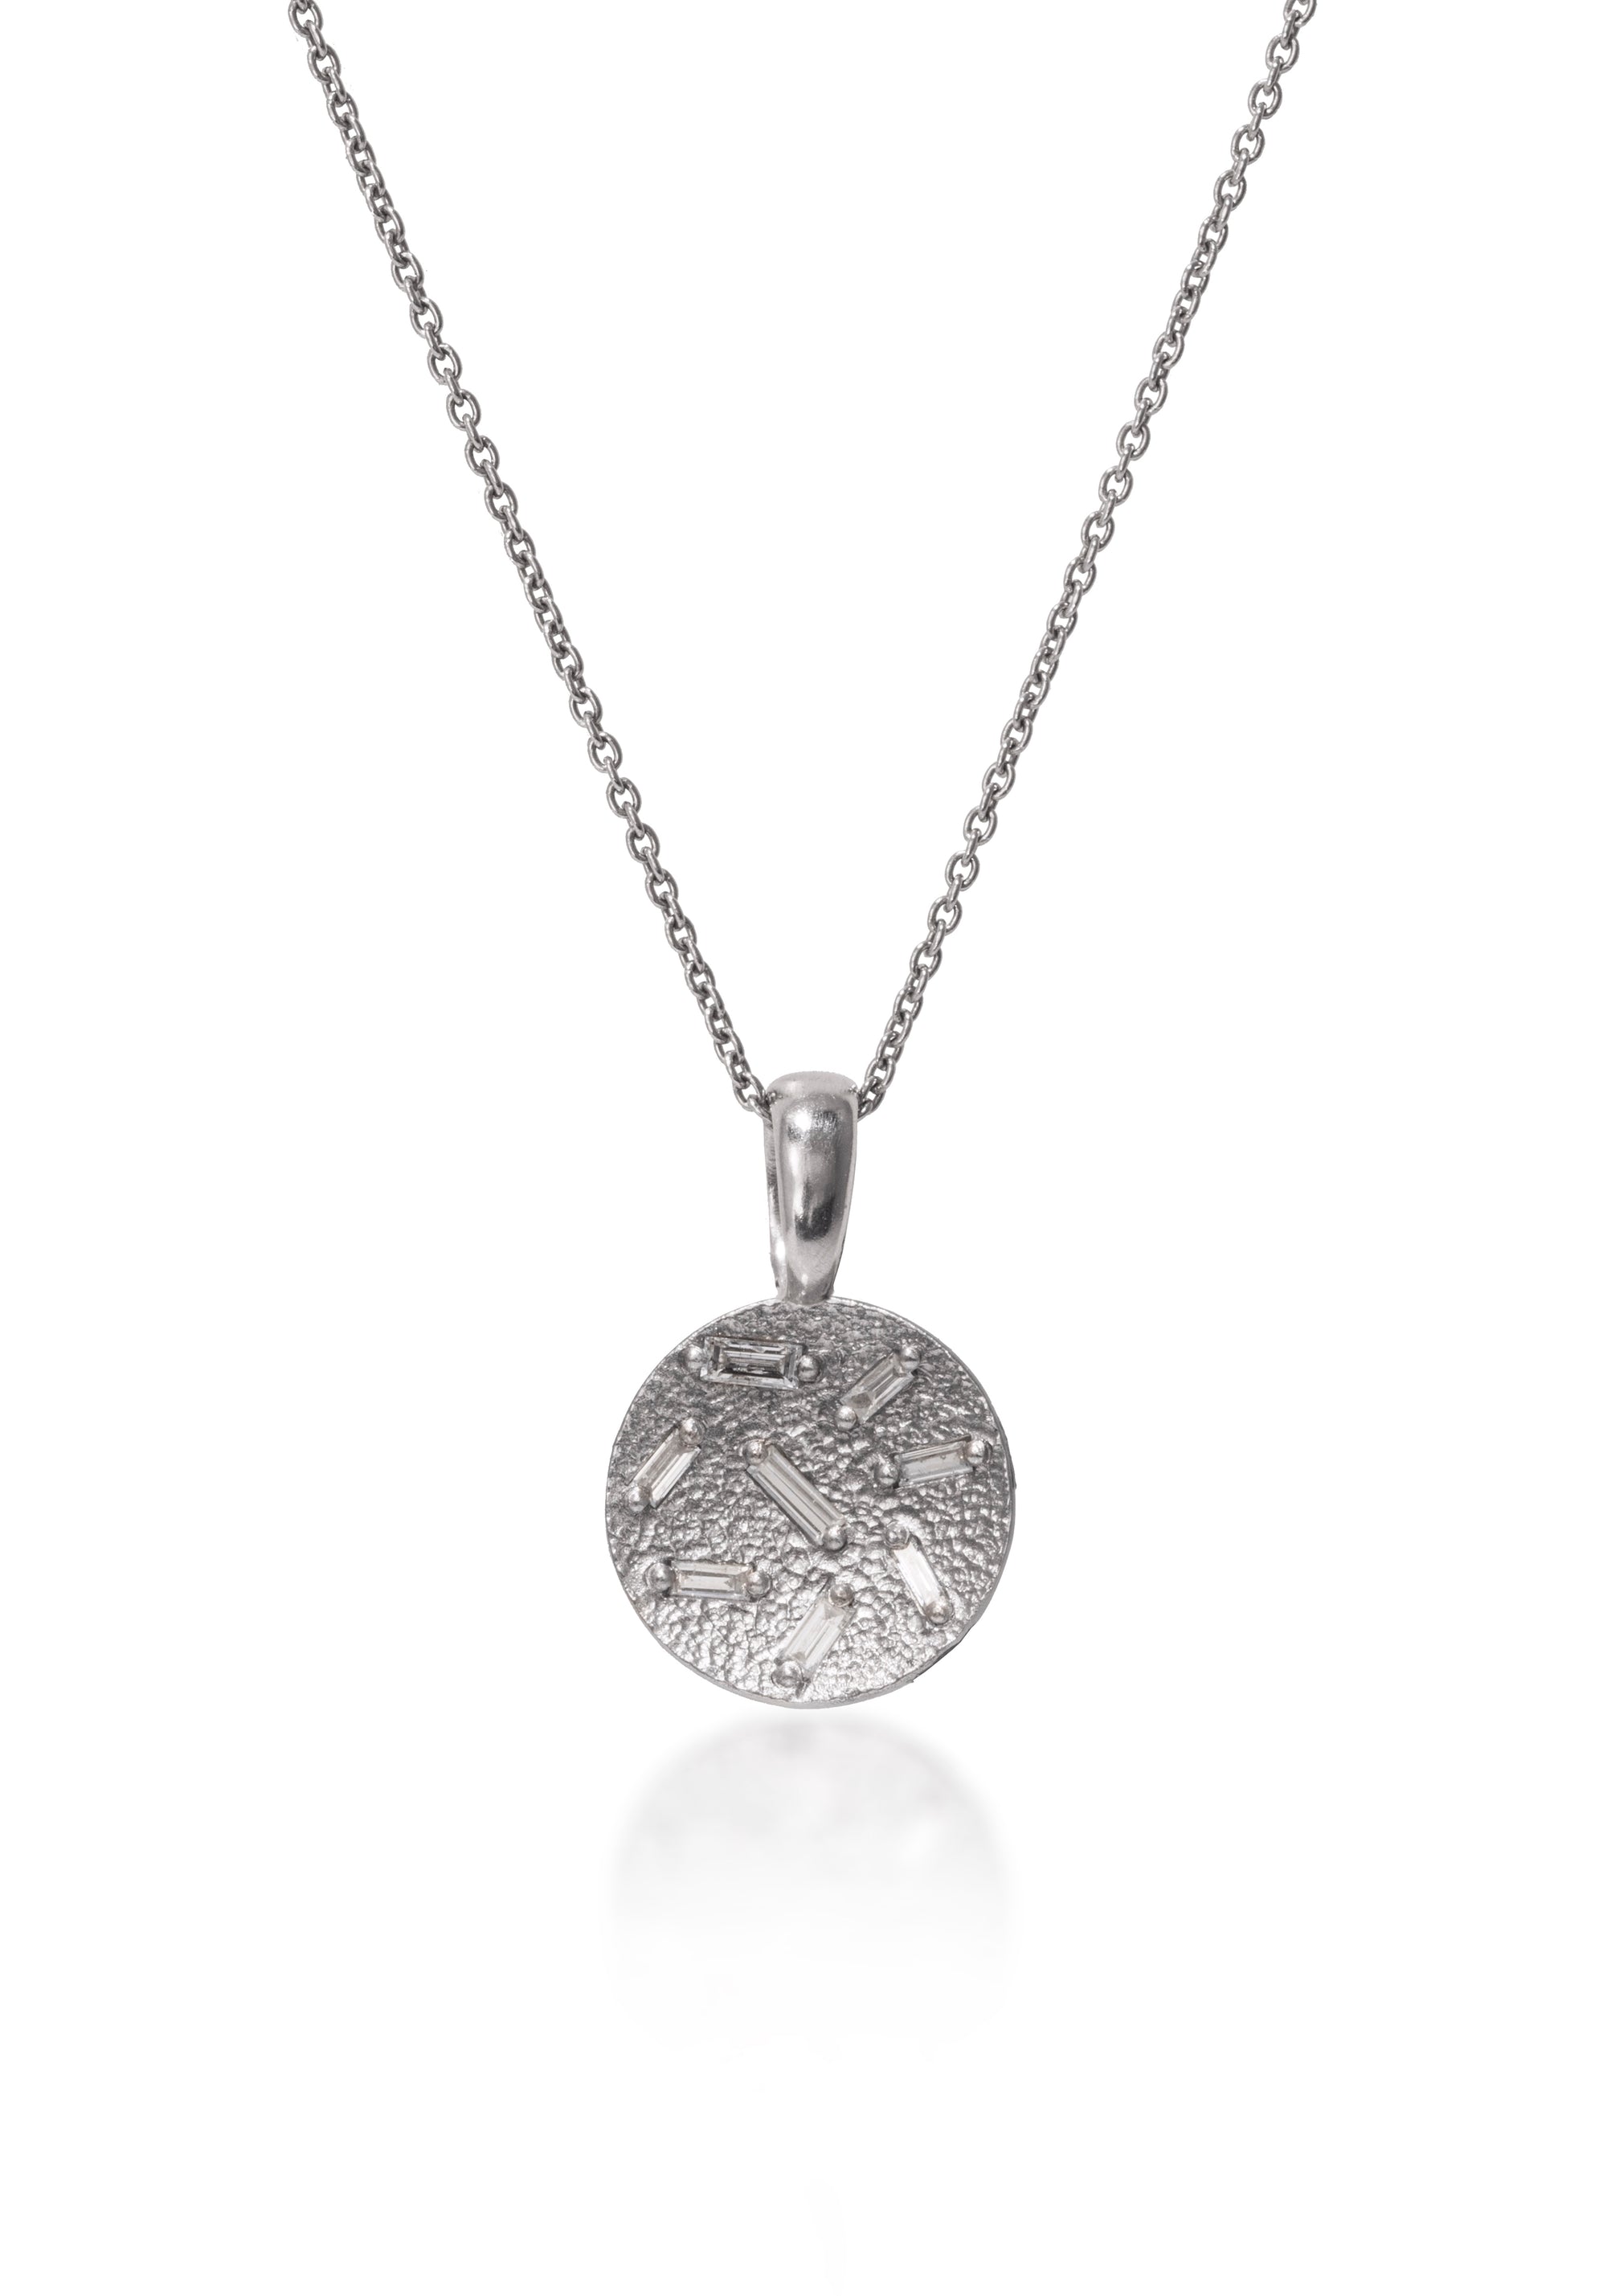 This stunning, small circular pendant is set with 8 white diamond baguettes. Richly textured to shimmer in the light, this piece is available in three color ways, oxidized silver, 18k gold and palladium.  0.227 tcw.